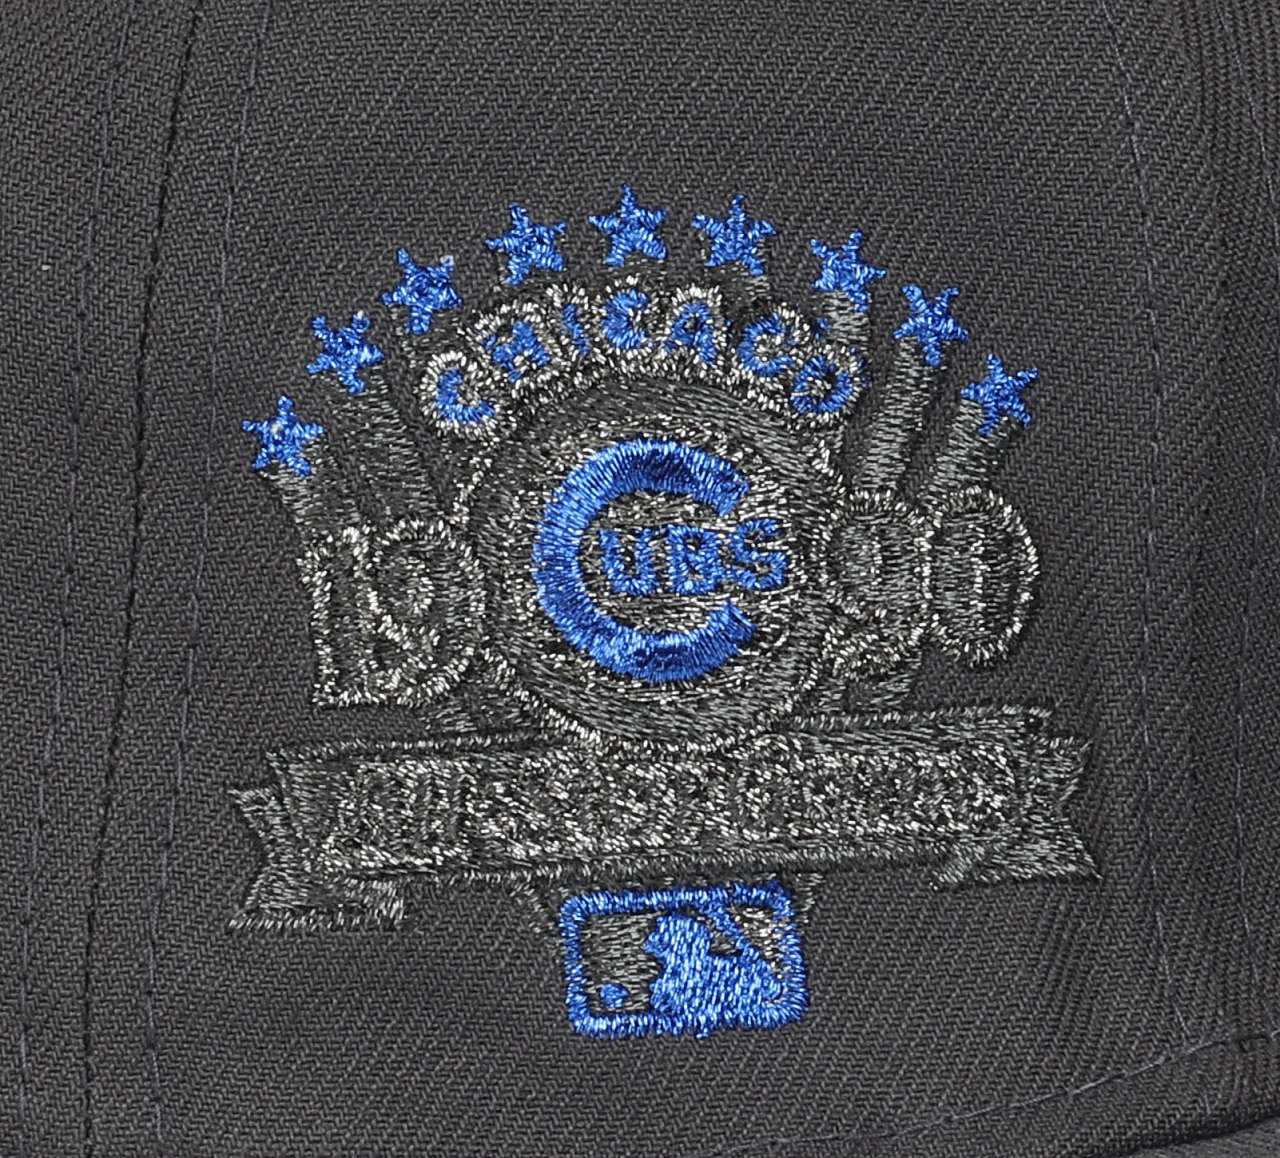 Chicago Cubs  MLB Cooperstown All-Star Game 1990 Sidepatch Gray Pop 59Fifty Basecap New Era